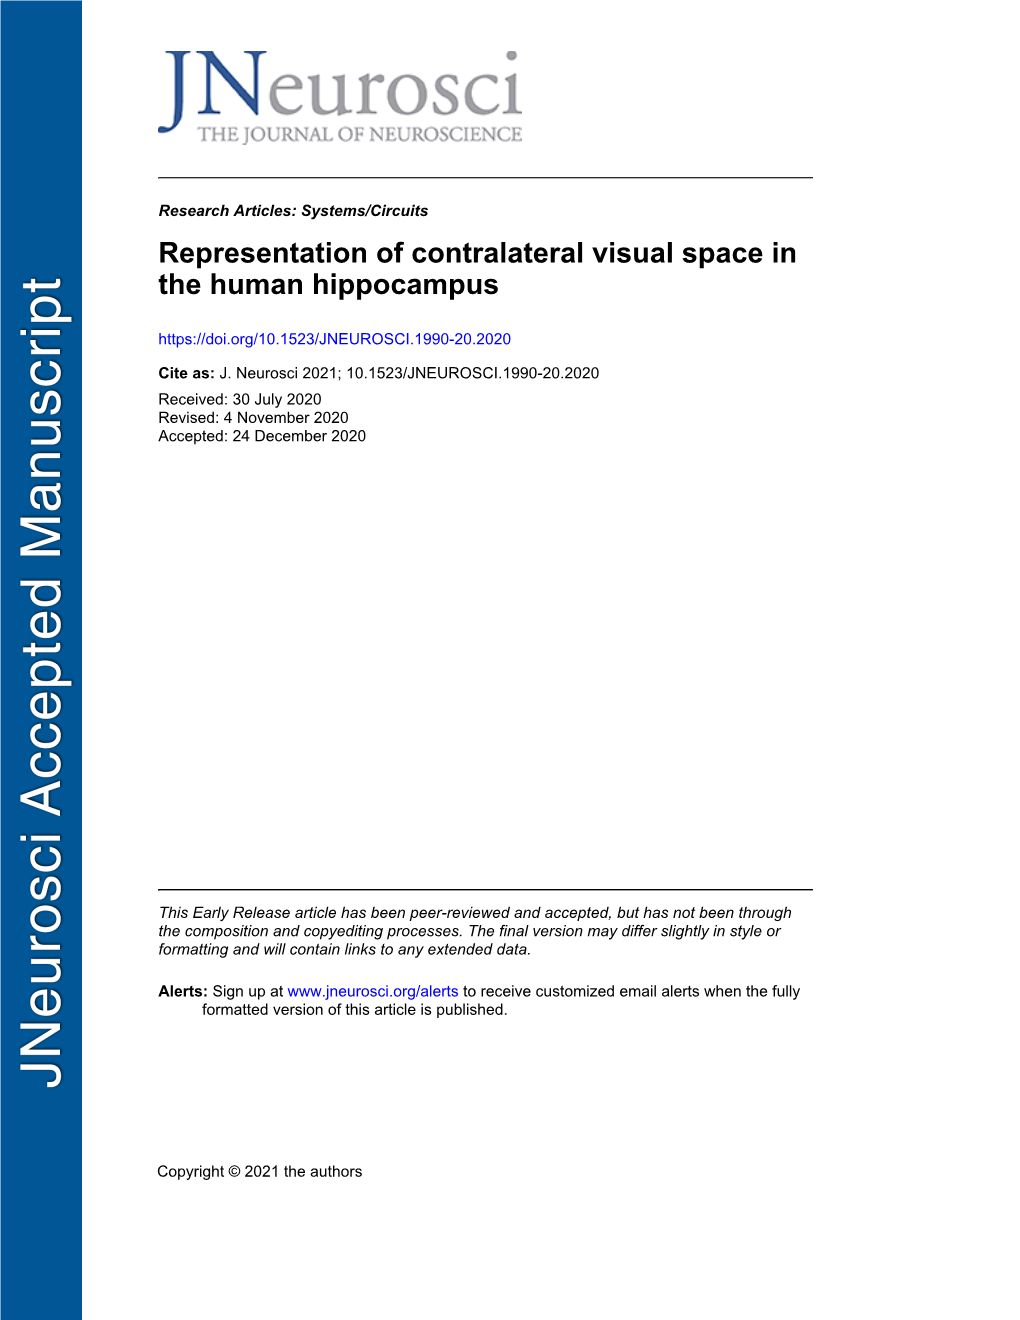 Representation of Contralateral Visual Space in the Human Hippocampus